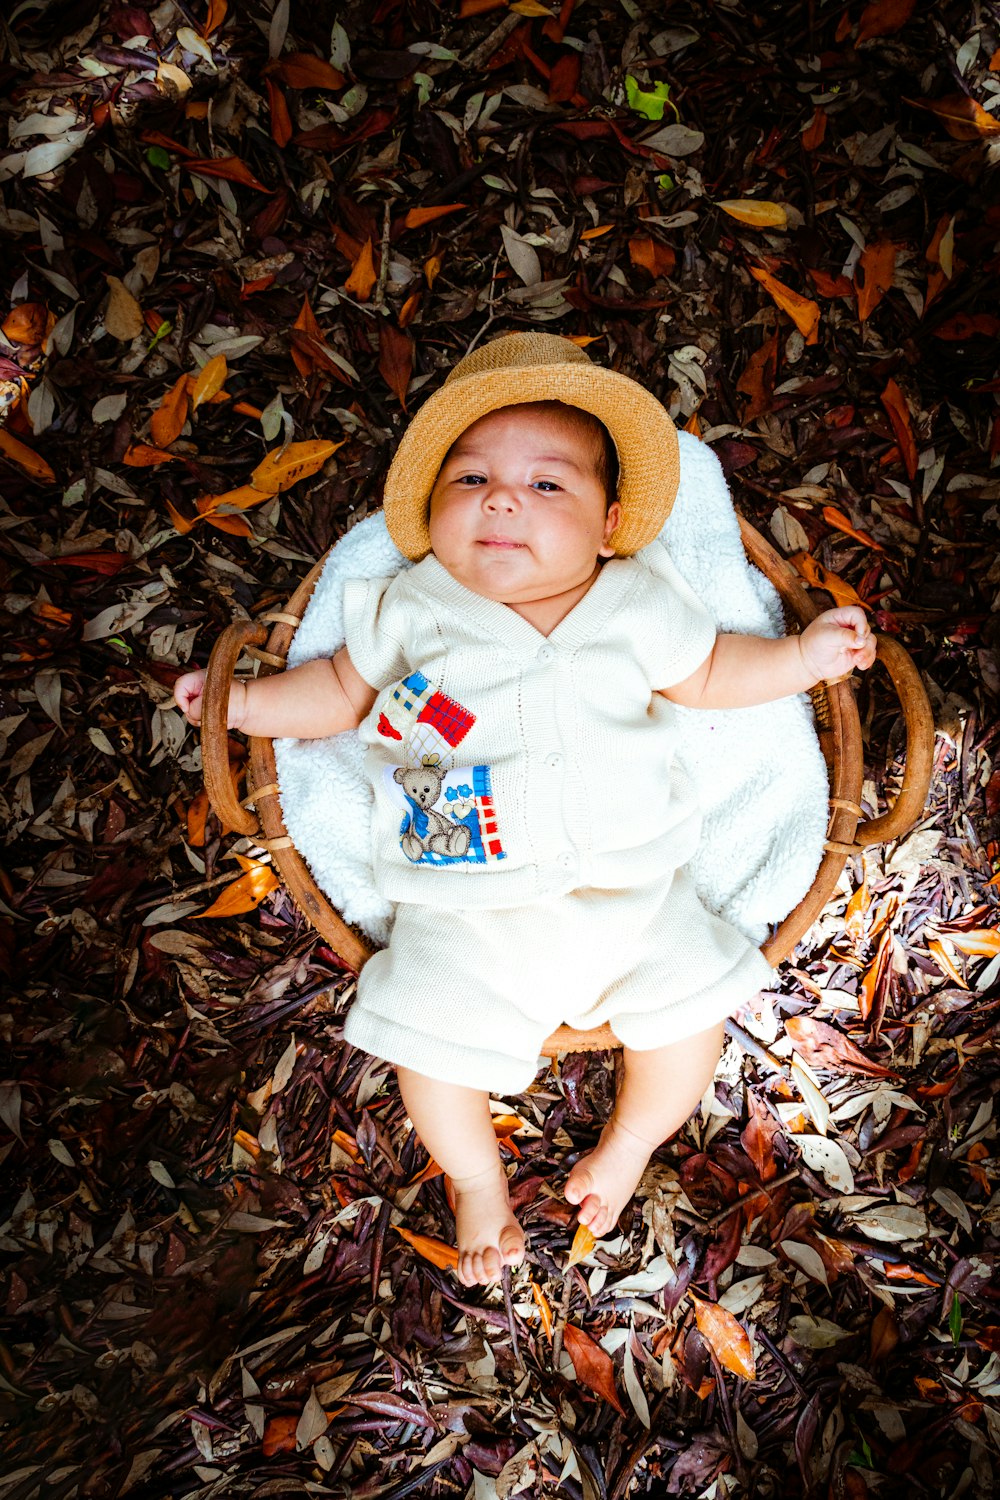 a baby wearing a white outfit and a hat sitting in a basket